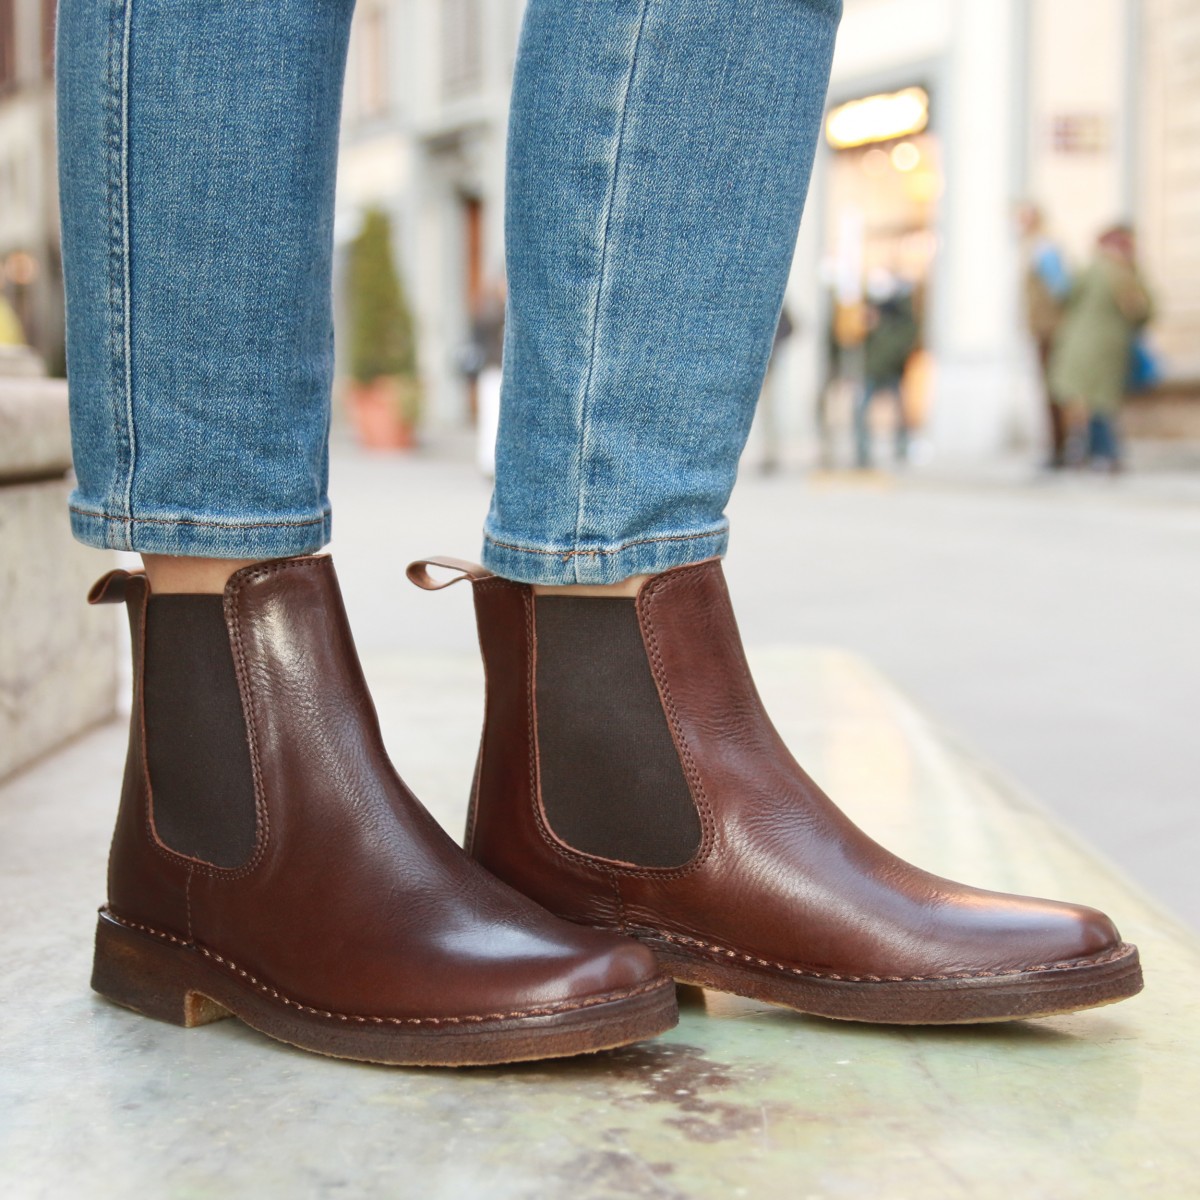 dark brown leather chelsea boot with natural rubber sole The leather craftsmen